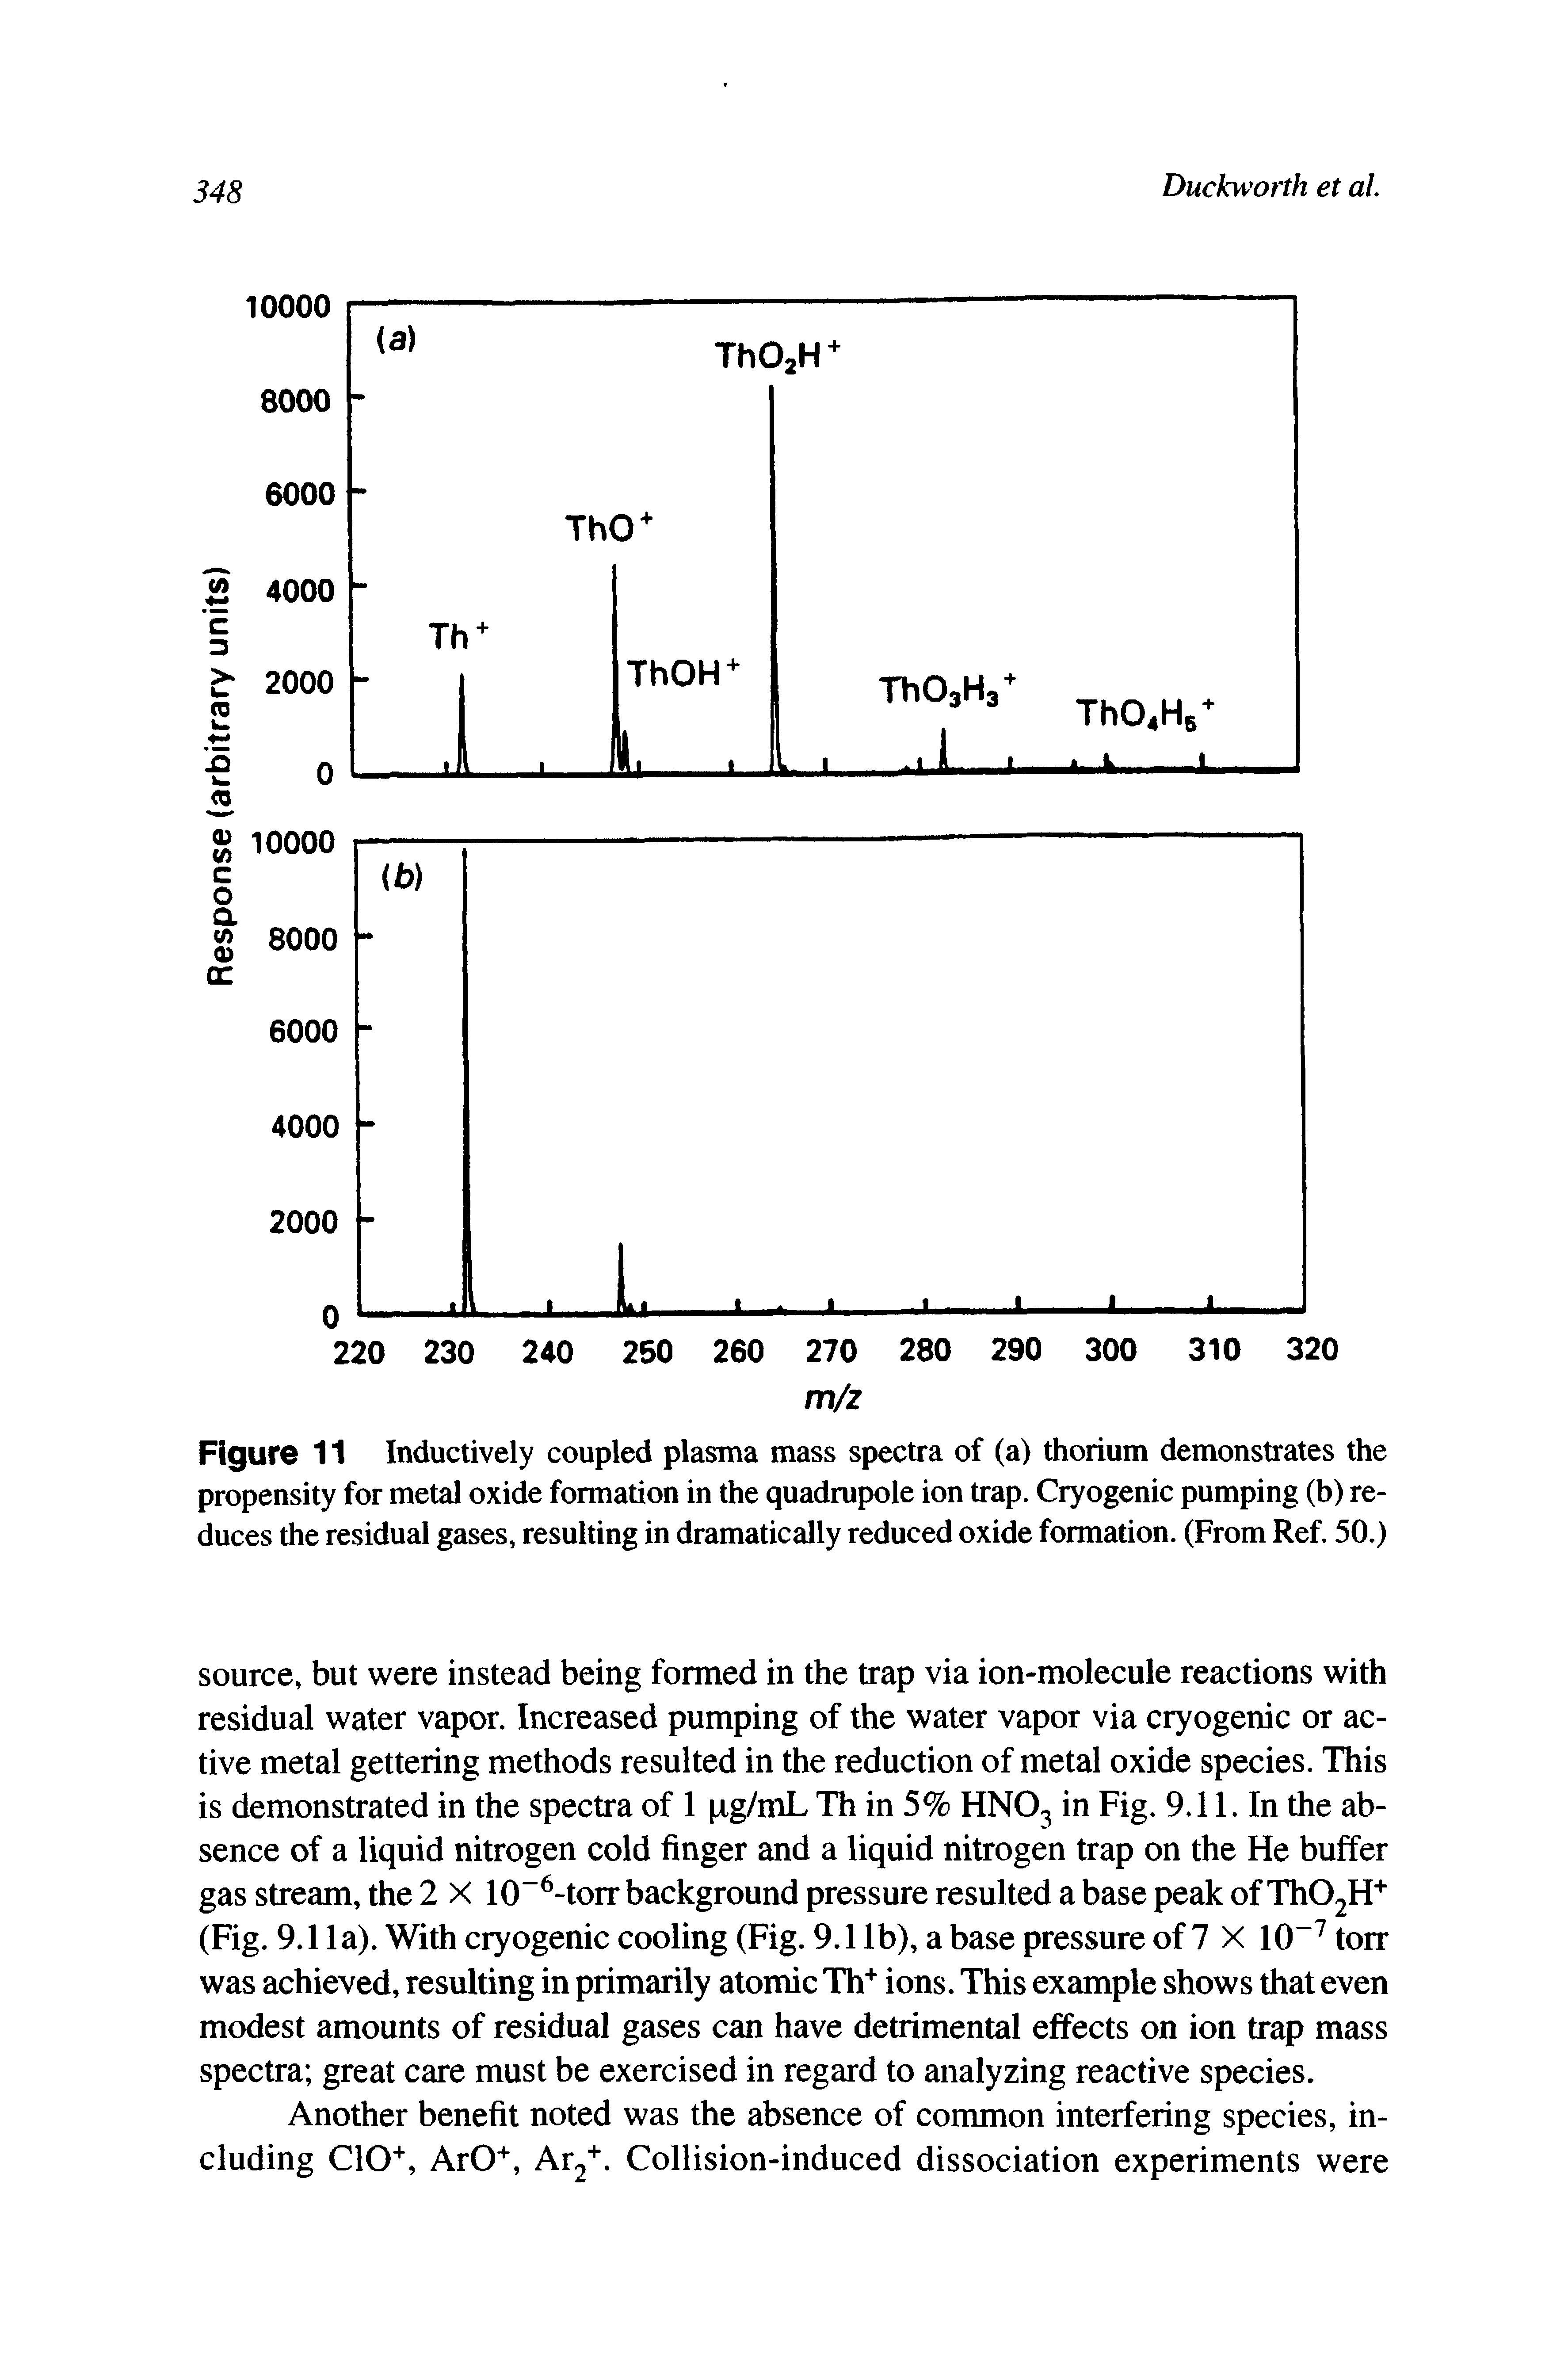 Figure 11 Inductively coupled plasma mass spectra of (a) thorium demonstrates the propensity for metal oxide formation in the quadrupole ion trap. Cryogenic pumping (b) reduces the residual gases, resulting in dramatically reduced oxide formation. (From Ref. 50.)...